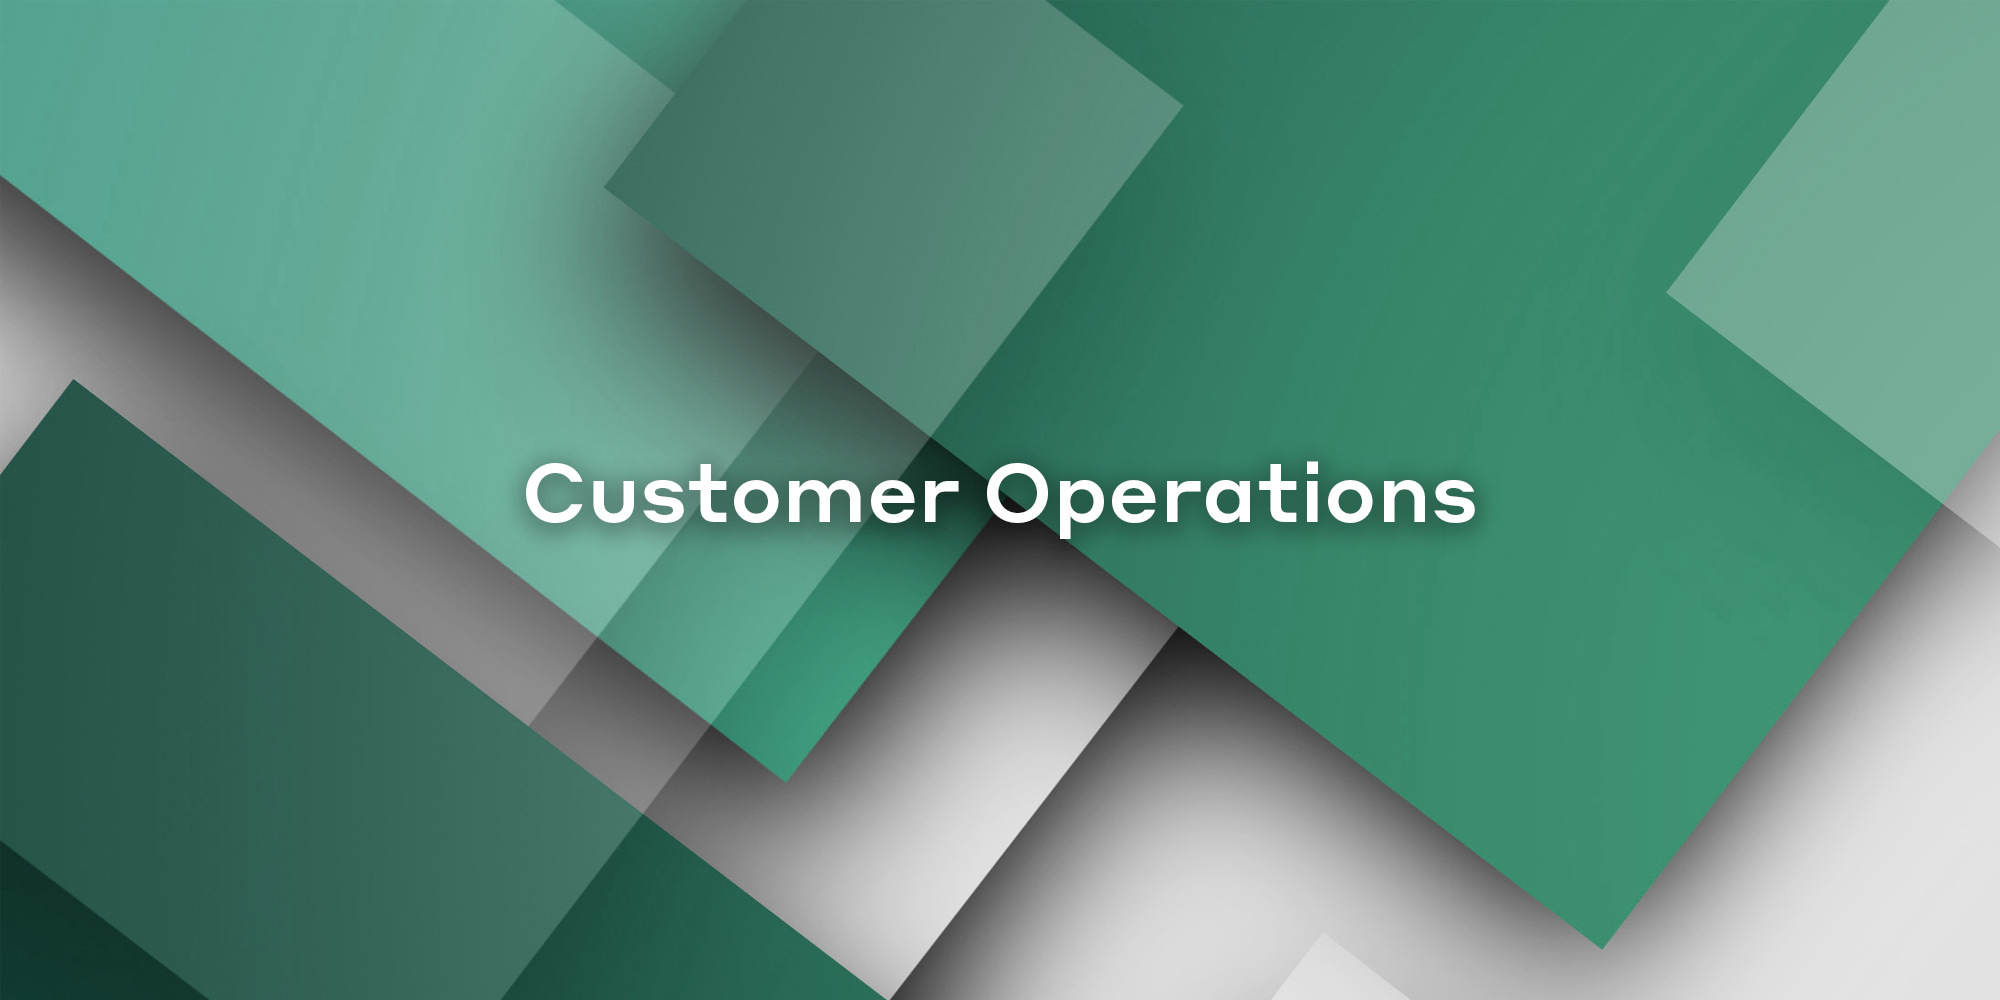 What's-it-like-to-be-in-customer-operations-at-fortra